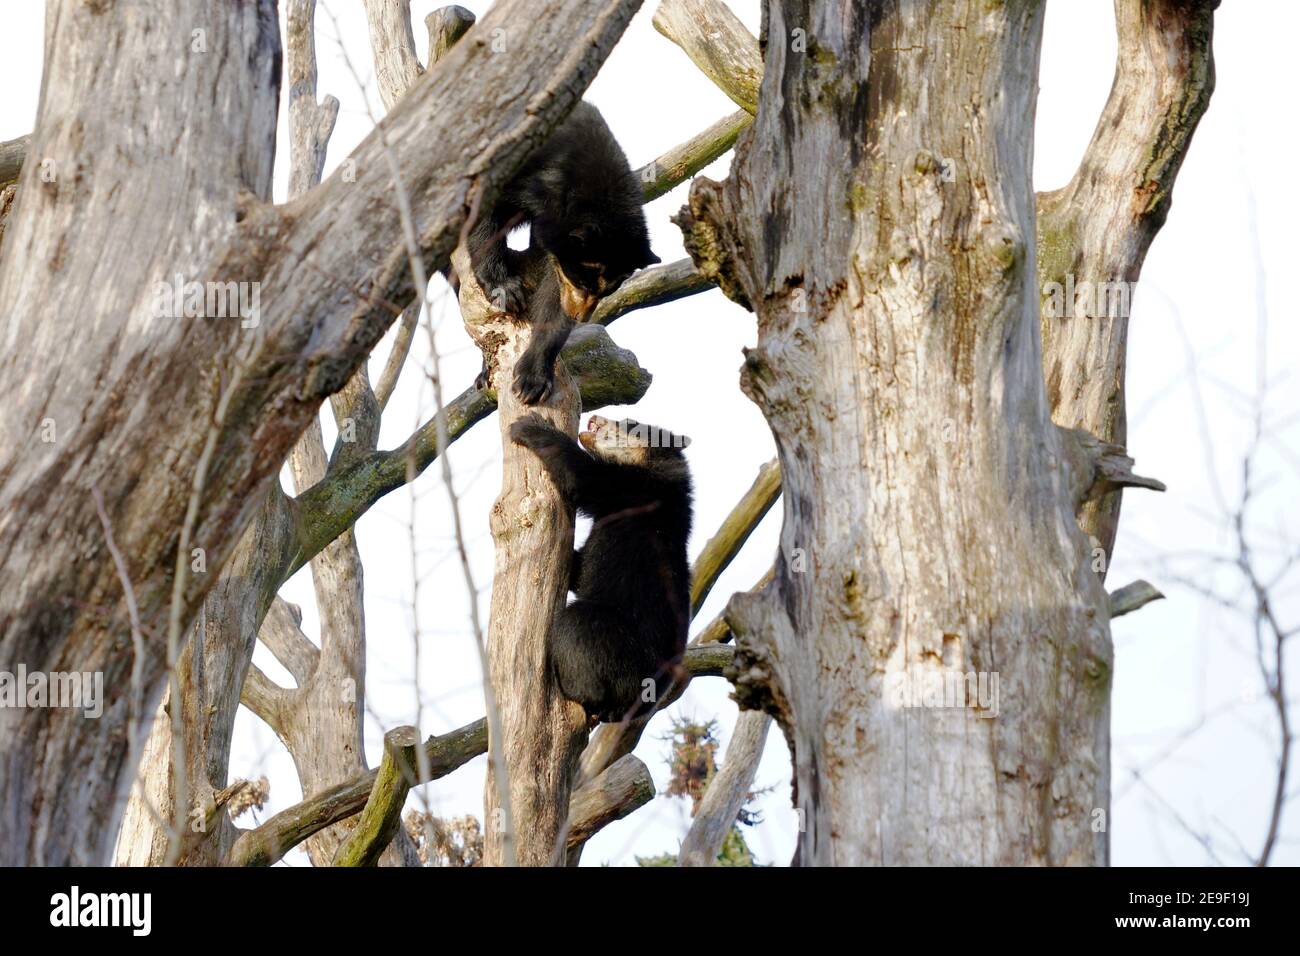 Two spectacled bears, in Latin called Tremarctos ornatus, playing together and climbing in tree crowns. It is short faced bear native to South America Stock Photo